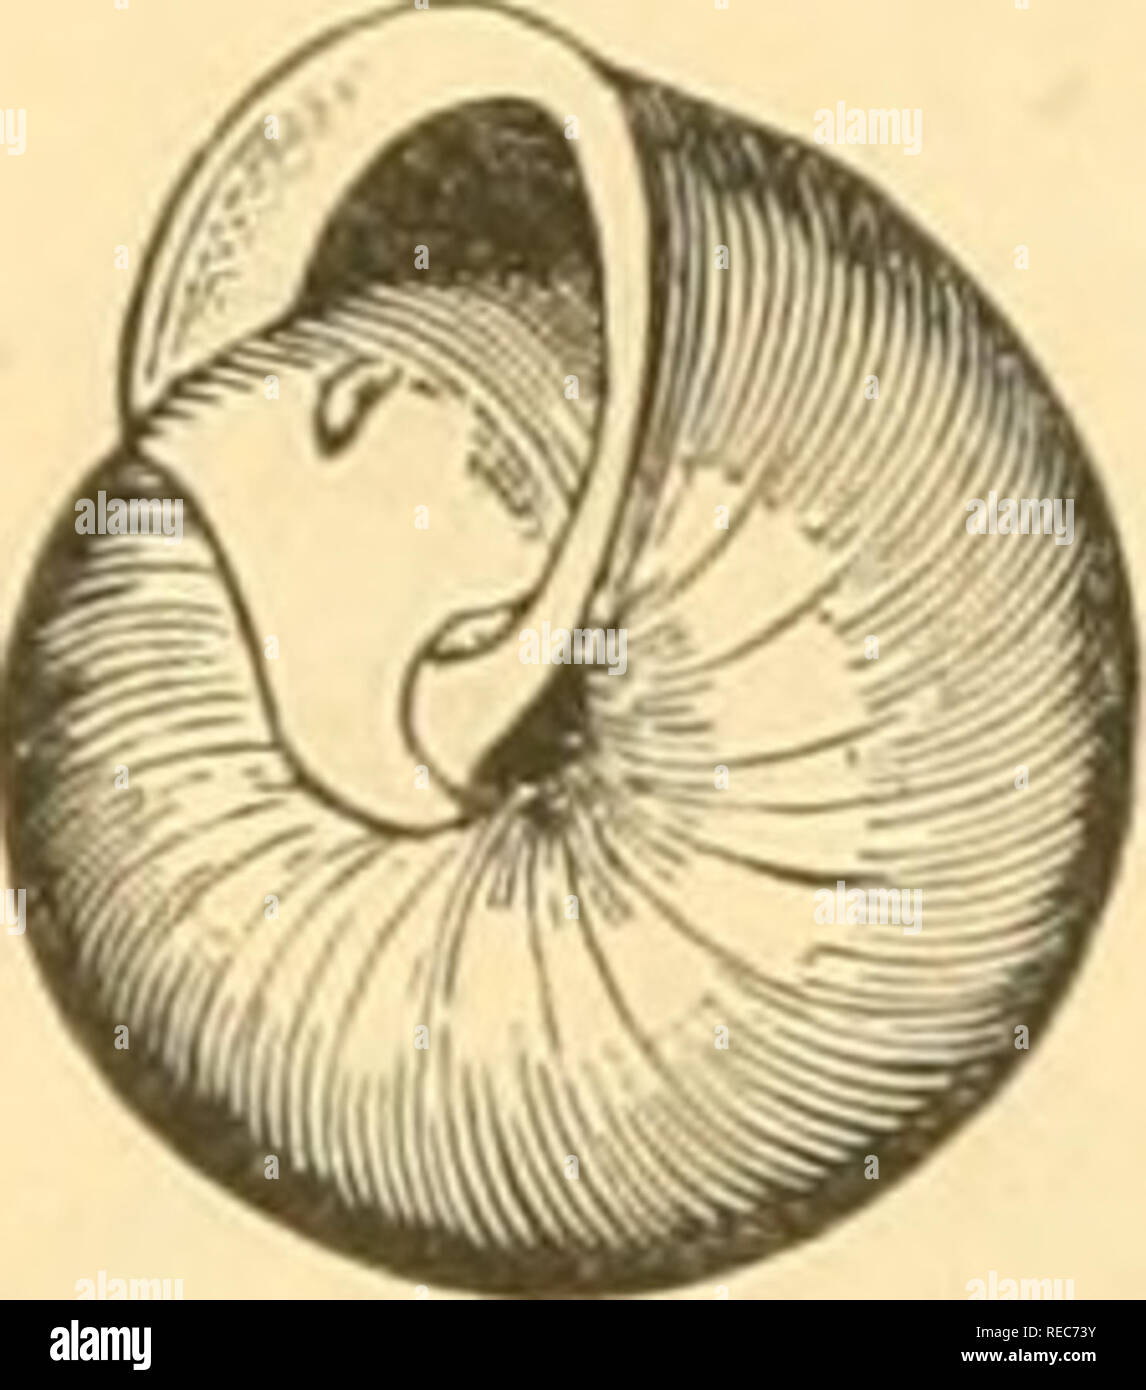 . Conchologia cestrica. The molluscous animals and their shells, of Chester county, Pa. Mollusks. Shell sub-globose, finely striate, yellowish-white to pale brown; whorls 5, rounded; base convex; aperture rounded; the peristome forming nearly two-thirds of a circle, and broadly reflected, white, flesh colored behind; umbilicus partly covered; sometimes a small, white, tooth on the pillar, often edentate. H. 10, W. 15, mill. Station, under logs in moist grounds, and meadows, Chester County; common. M. bucculenta, var. Rufa, Michener, Amer. Jour. Conch., II., 1866. Helix rufa, De Kay. Nat. Hist. Stock Photo